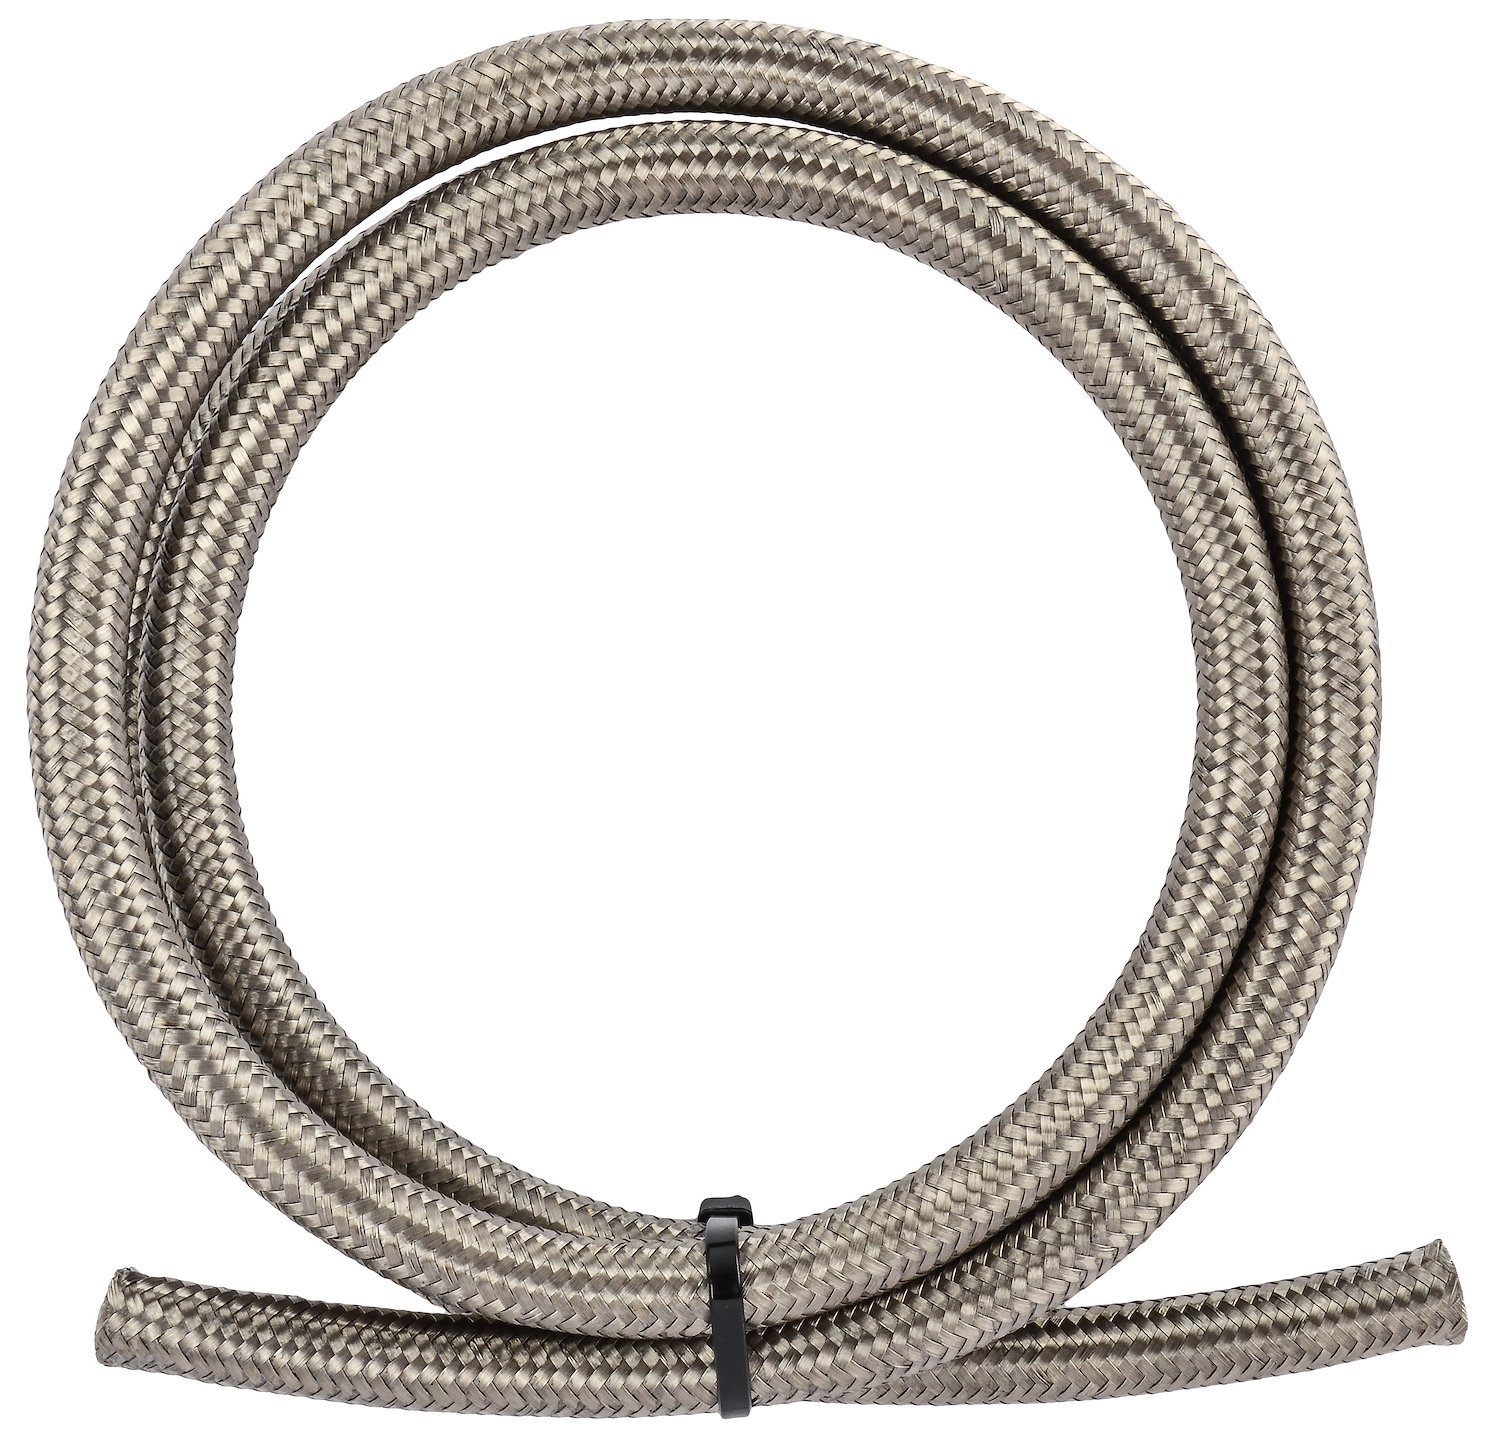 Pro-Flo 200 Series Stainless Steel Braided Hose -10